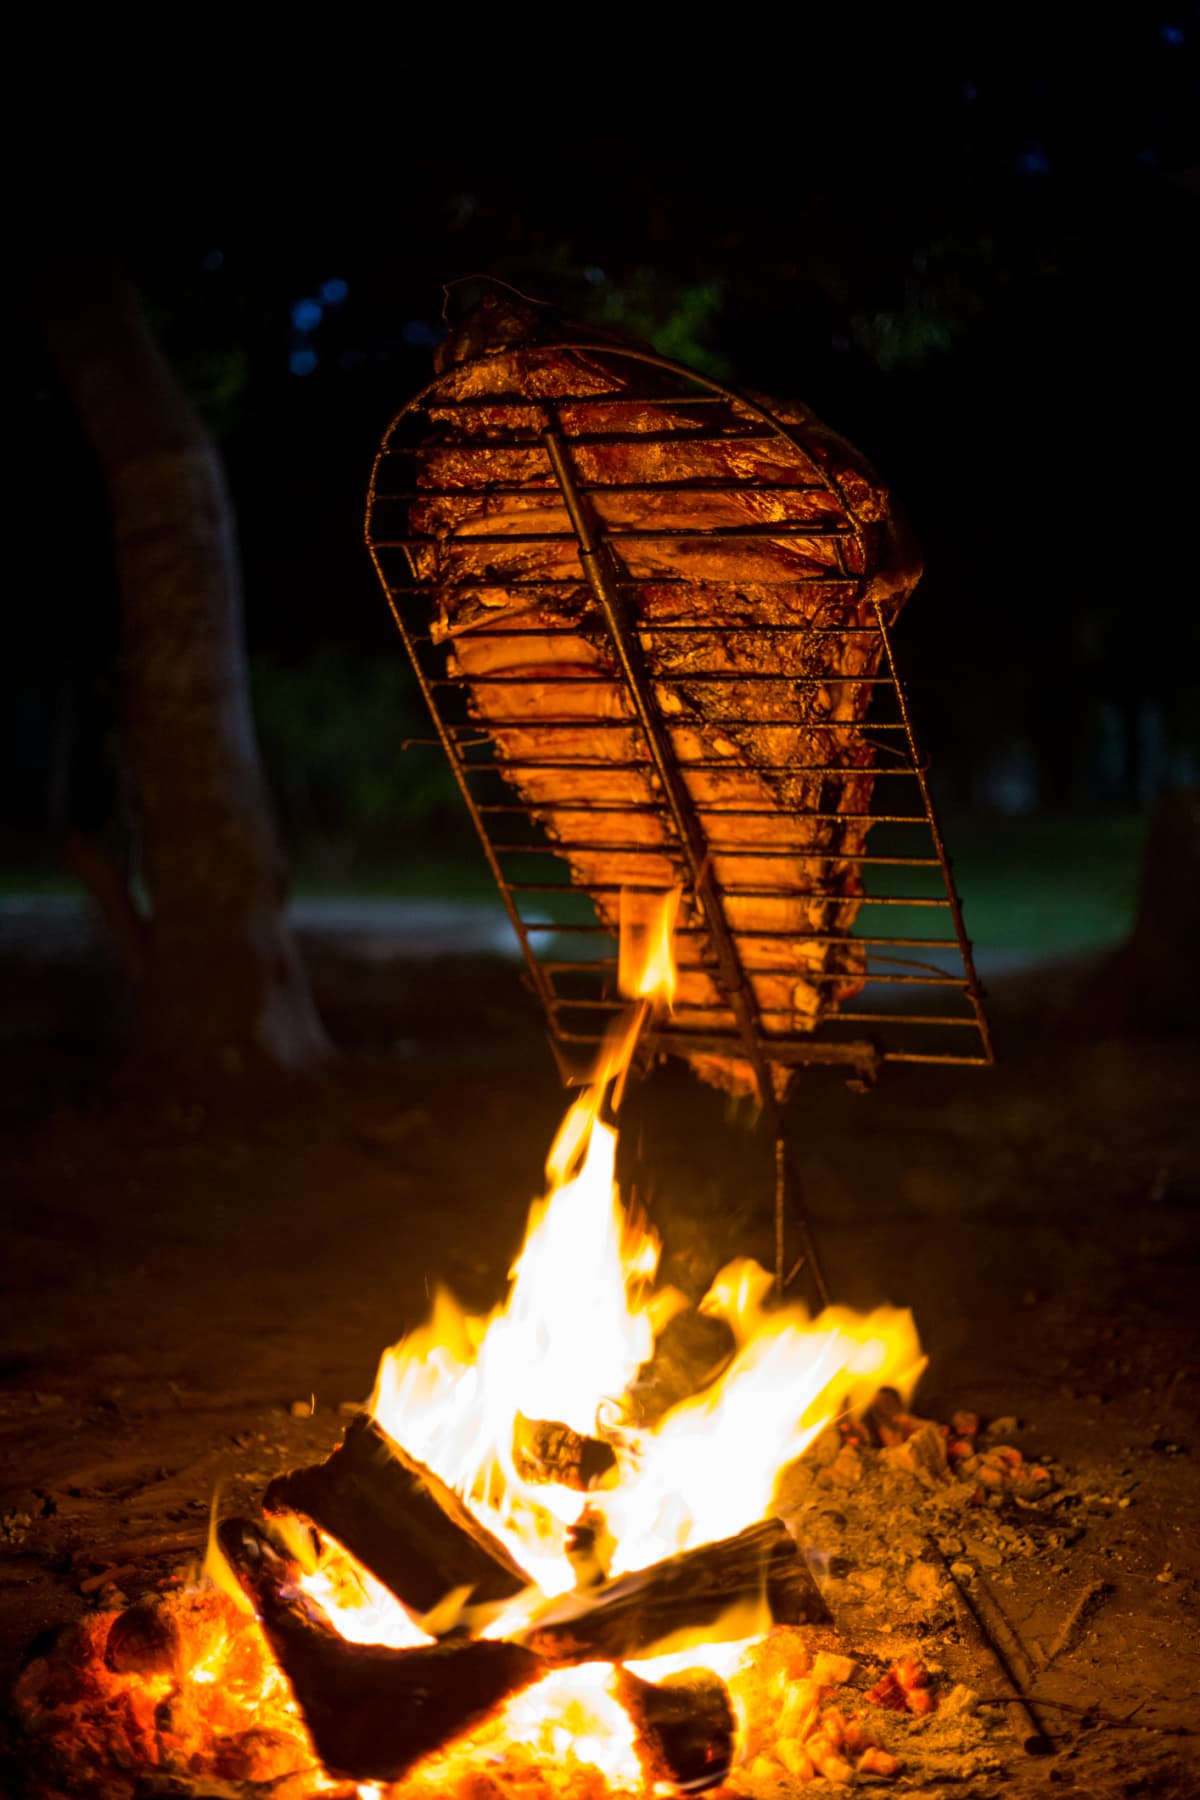 Meat on the spit or asado in the stake.  Grill on the coals. Traditional Argentine barbecue.